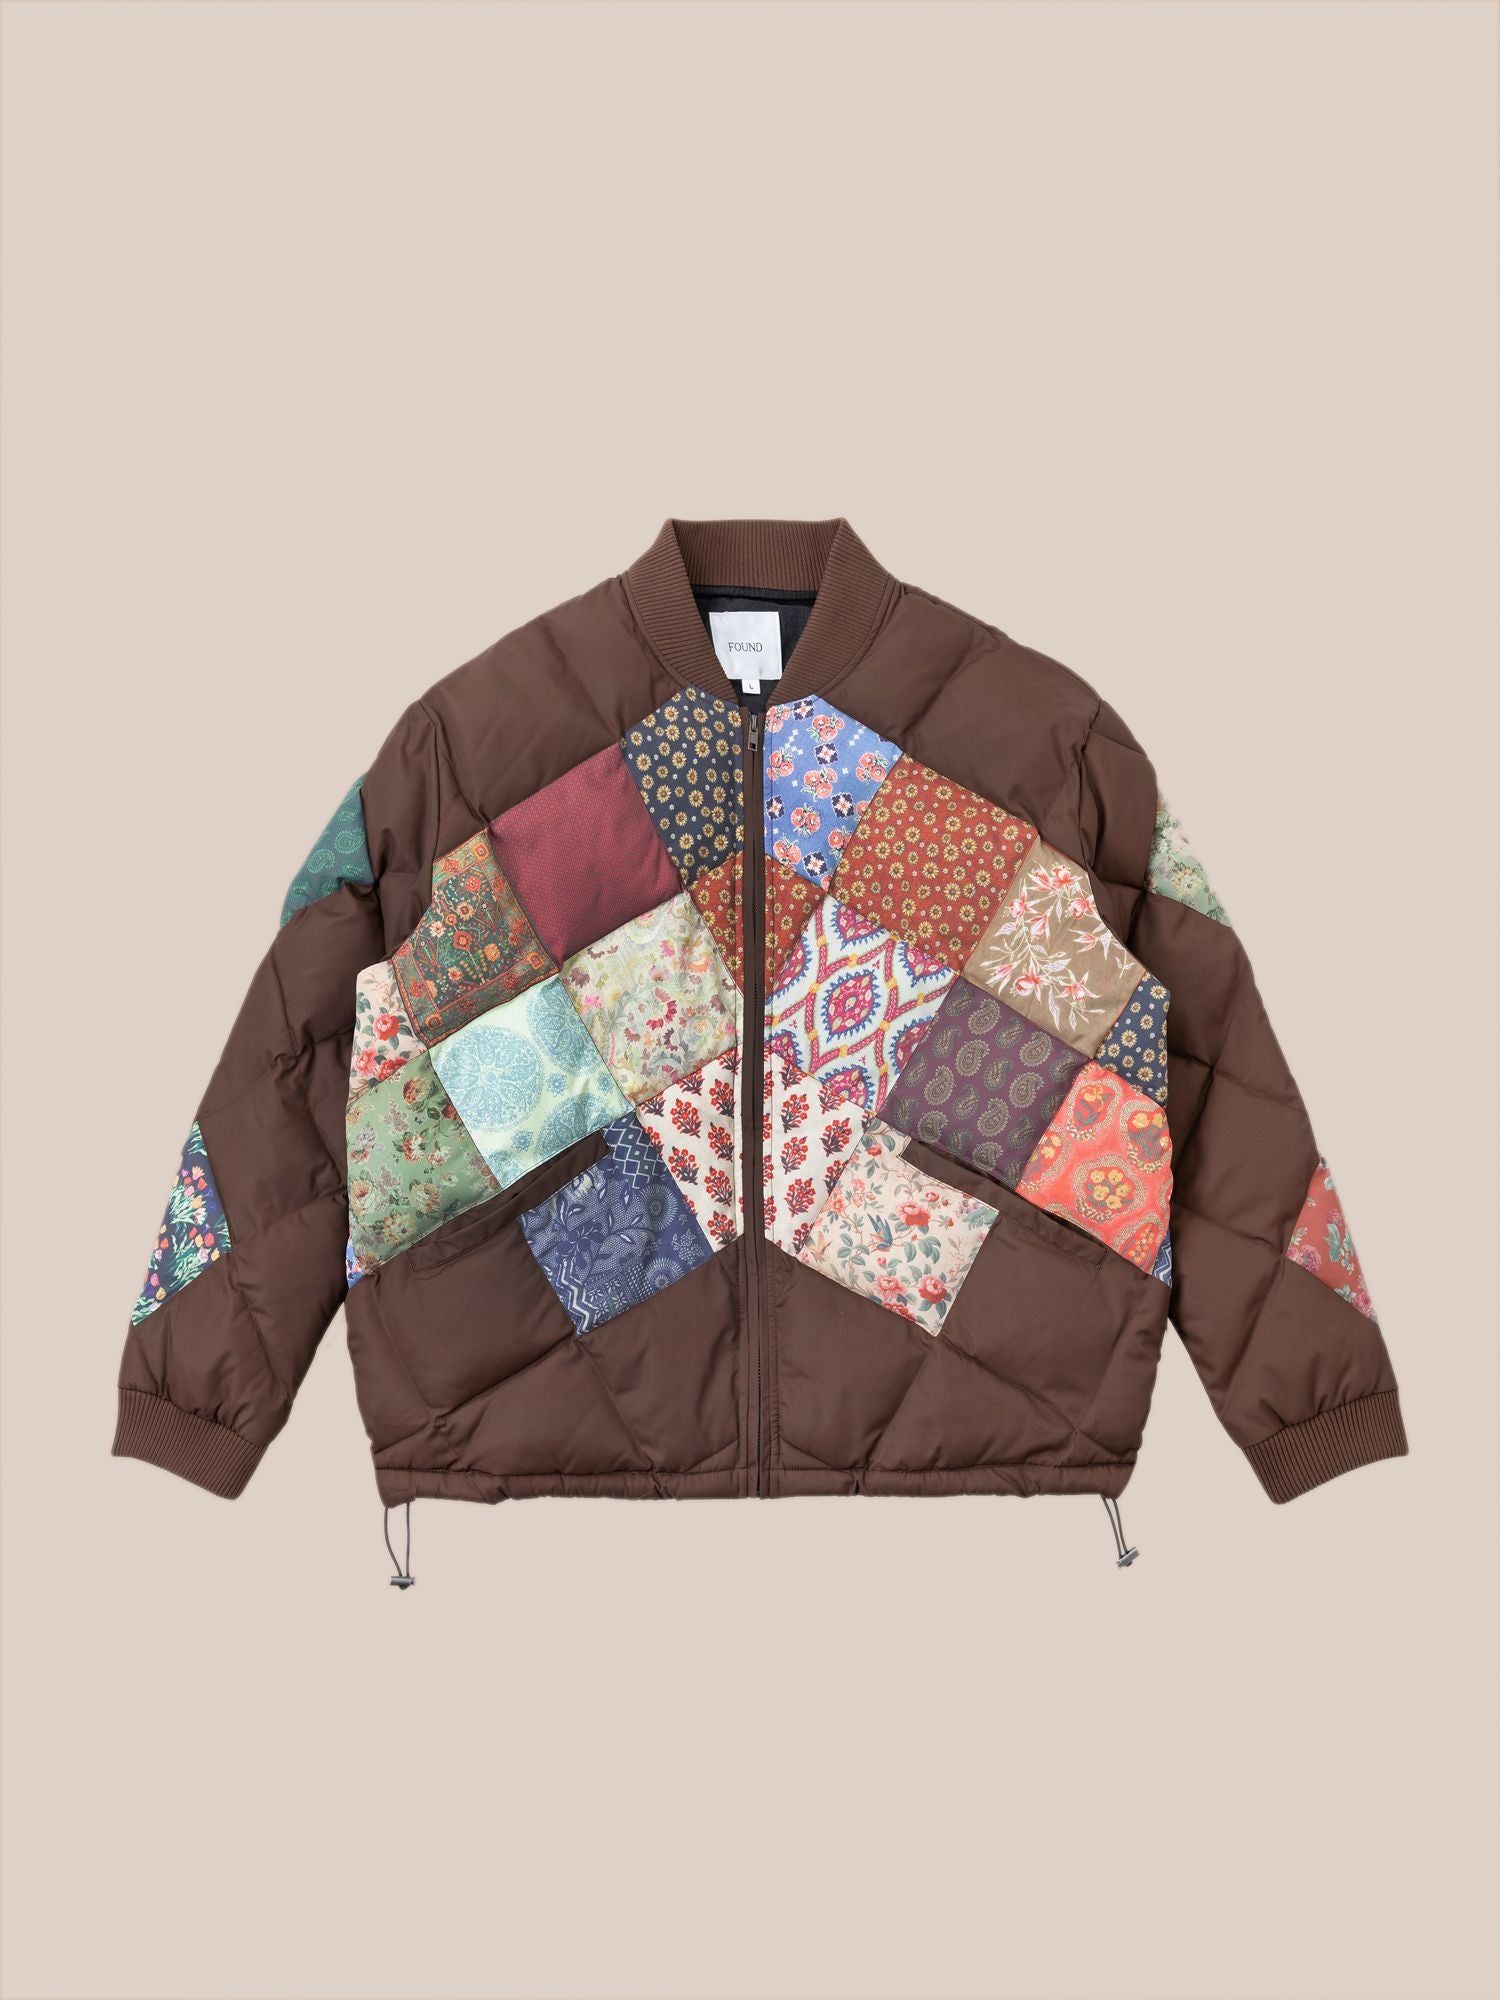 A brown Diamond Quilt Patchwork Jacket by Found featuring a colorful patchwork pattern with various floral and geometric designs, reminiscent of traditional South Asian prints.